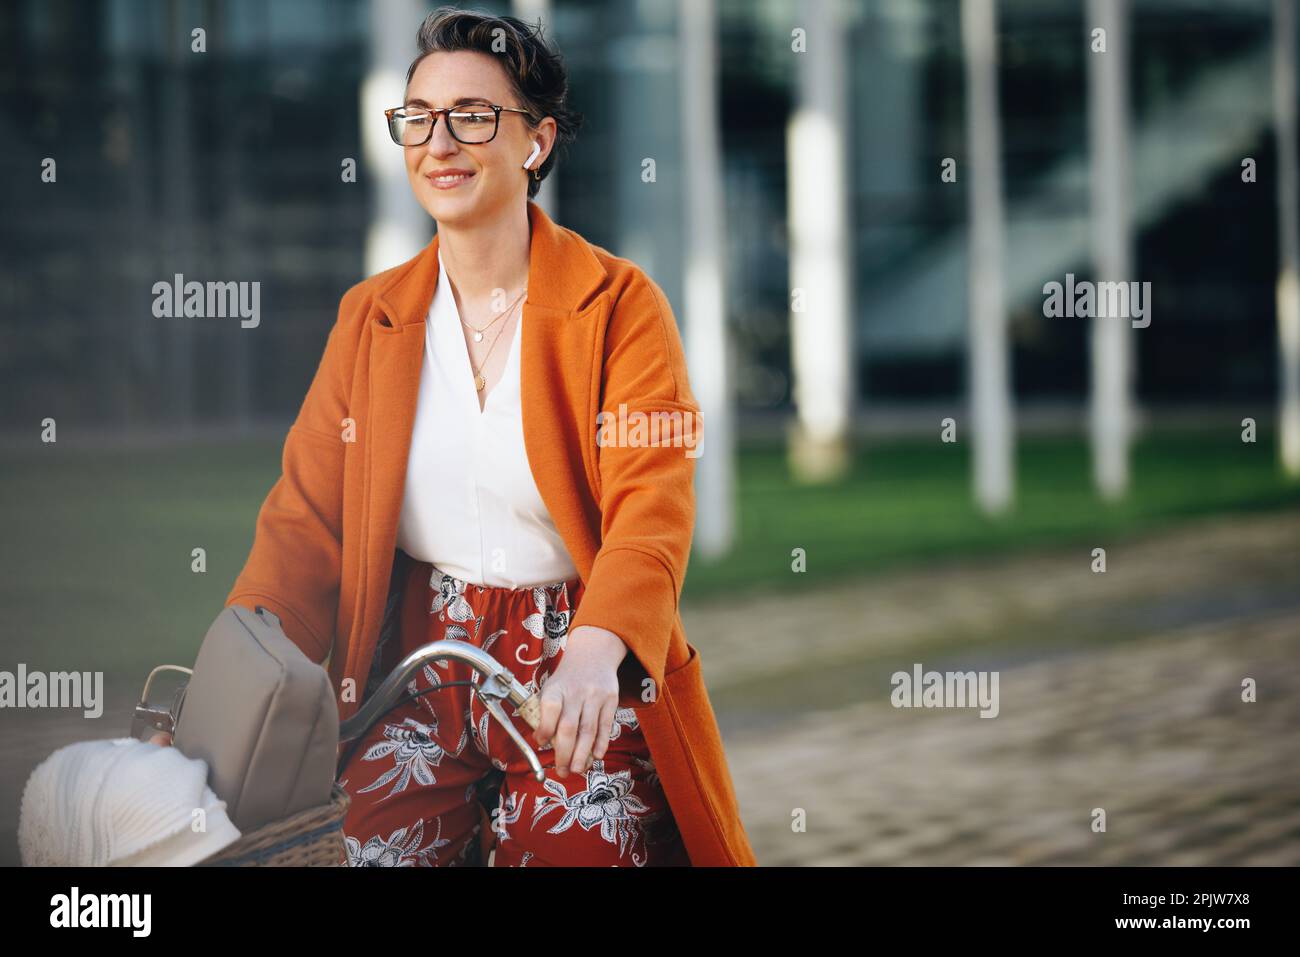 Mature business woman riding a bike and listening to music on her way to work in the morning. Happy business woman commuting to her office in the city Stock Photo